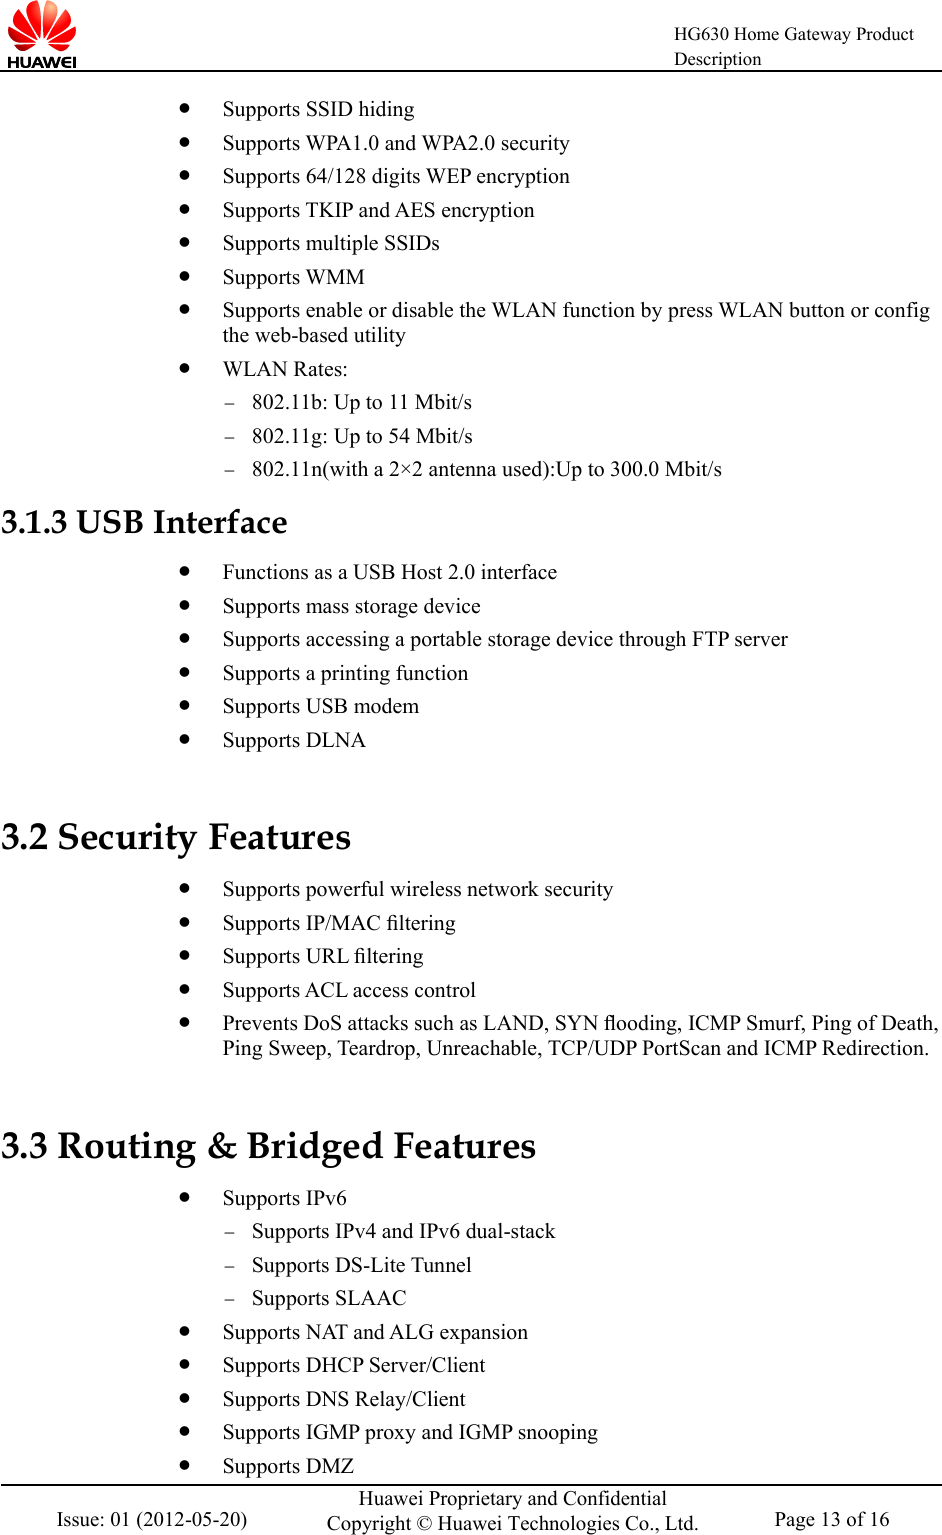    HG630 Home Gateway Product Description  Issue: 01 (2012-05-20) Huawei Proprietary and Confidential Copyright © Huawei Technologies Co., Ltd. Page 13 of 16   Supports SSID hiding  Supports WPA1.0 and WPA2.0 security  Supports 64/128 digits WEP encryption  Supports TKIP and AES encryption  Supports multiple SSIDs  Supports WMM  Supports enable or disable the WLAN function by press WLAN button or config the web-based utility  WLAN Rates: − 802.11b: Up to 11 Mbit/s − 802.11g: Up to 54 Mbit/s − 802.11n(with a 2×2 antenna used):Up to 300.0 Mbit/s 3.1.3 USB Interface  Functions as a USB Host 2.0 interface  Supports mass storage device  Supports accessing a portable storage device through FTP server  Supports a printing function  Supports USB modem  Supports DLNA 3.2 Security Features  Supports powerful wireless network security  Supports IP/MAC ﬁltering  Supports URL ﬁltering  Supports ACL access control  Prevents DoS attacks such as LAND, SYN ﬂooding, ICMP Smurf, Ping of Death, Ping Sweep, Teardrop, Unreachable, TCP/UDP PortScan and ICMP Redirection. 3.3 Routing &amp; Bridged Features  Supports IPv6   − Supports IPv4 and IPv6 dual-stack   − Supports DS-Lite Tunnel − Supports SLAAC  Supports NAT and ALG expansion  Supports DHCP Server/Client  Supports DNS Relay/Client  Supports IGMP proxy and IGMP snooping  Supports DMZ 